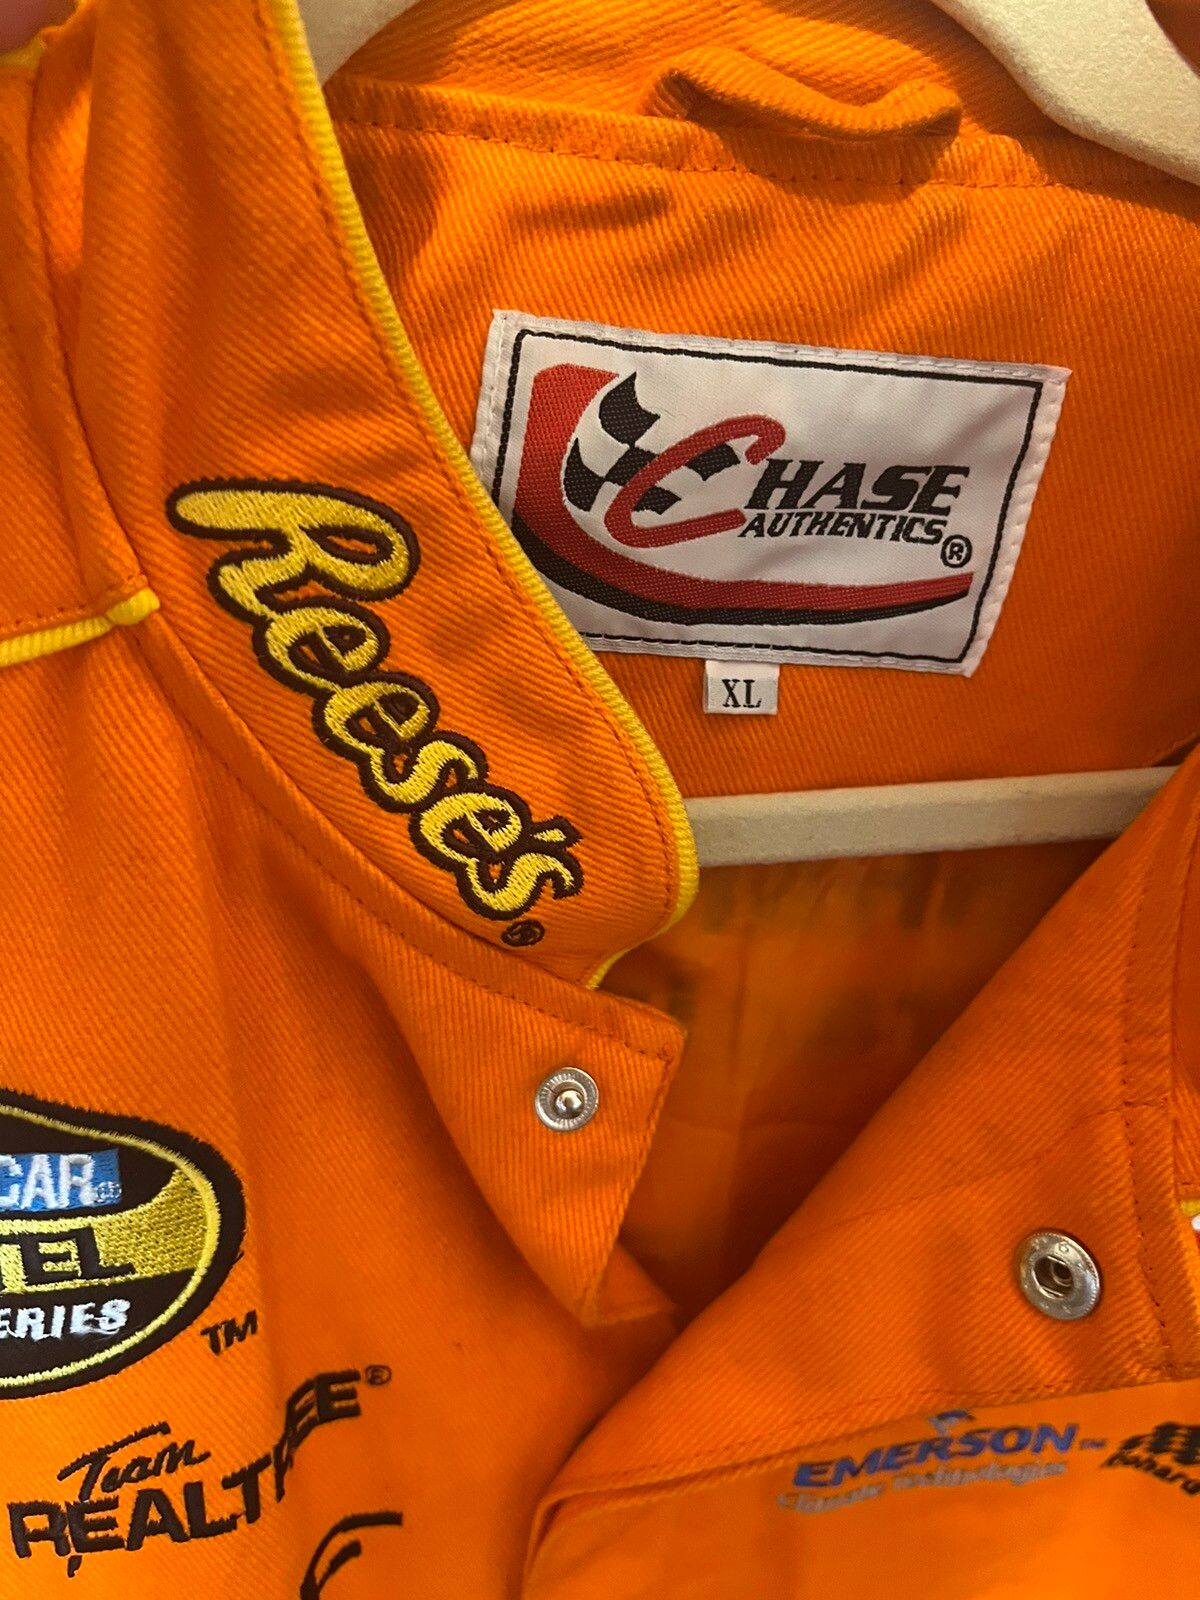 Chase Authentics Reese’s Kevin Harvick Nascar Jacket Size US XL / EU 56 / 4 - 2 Preview